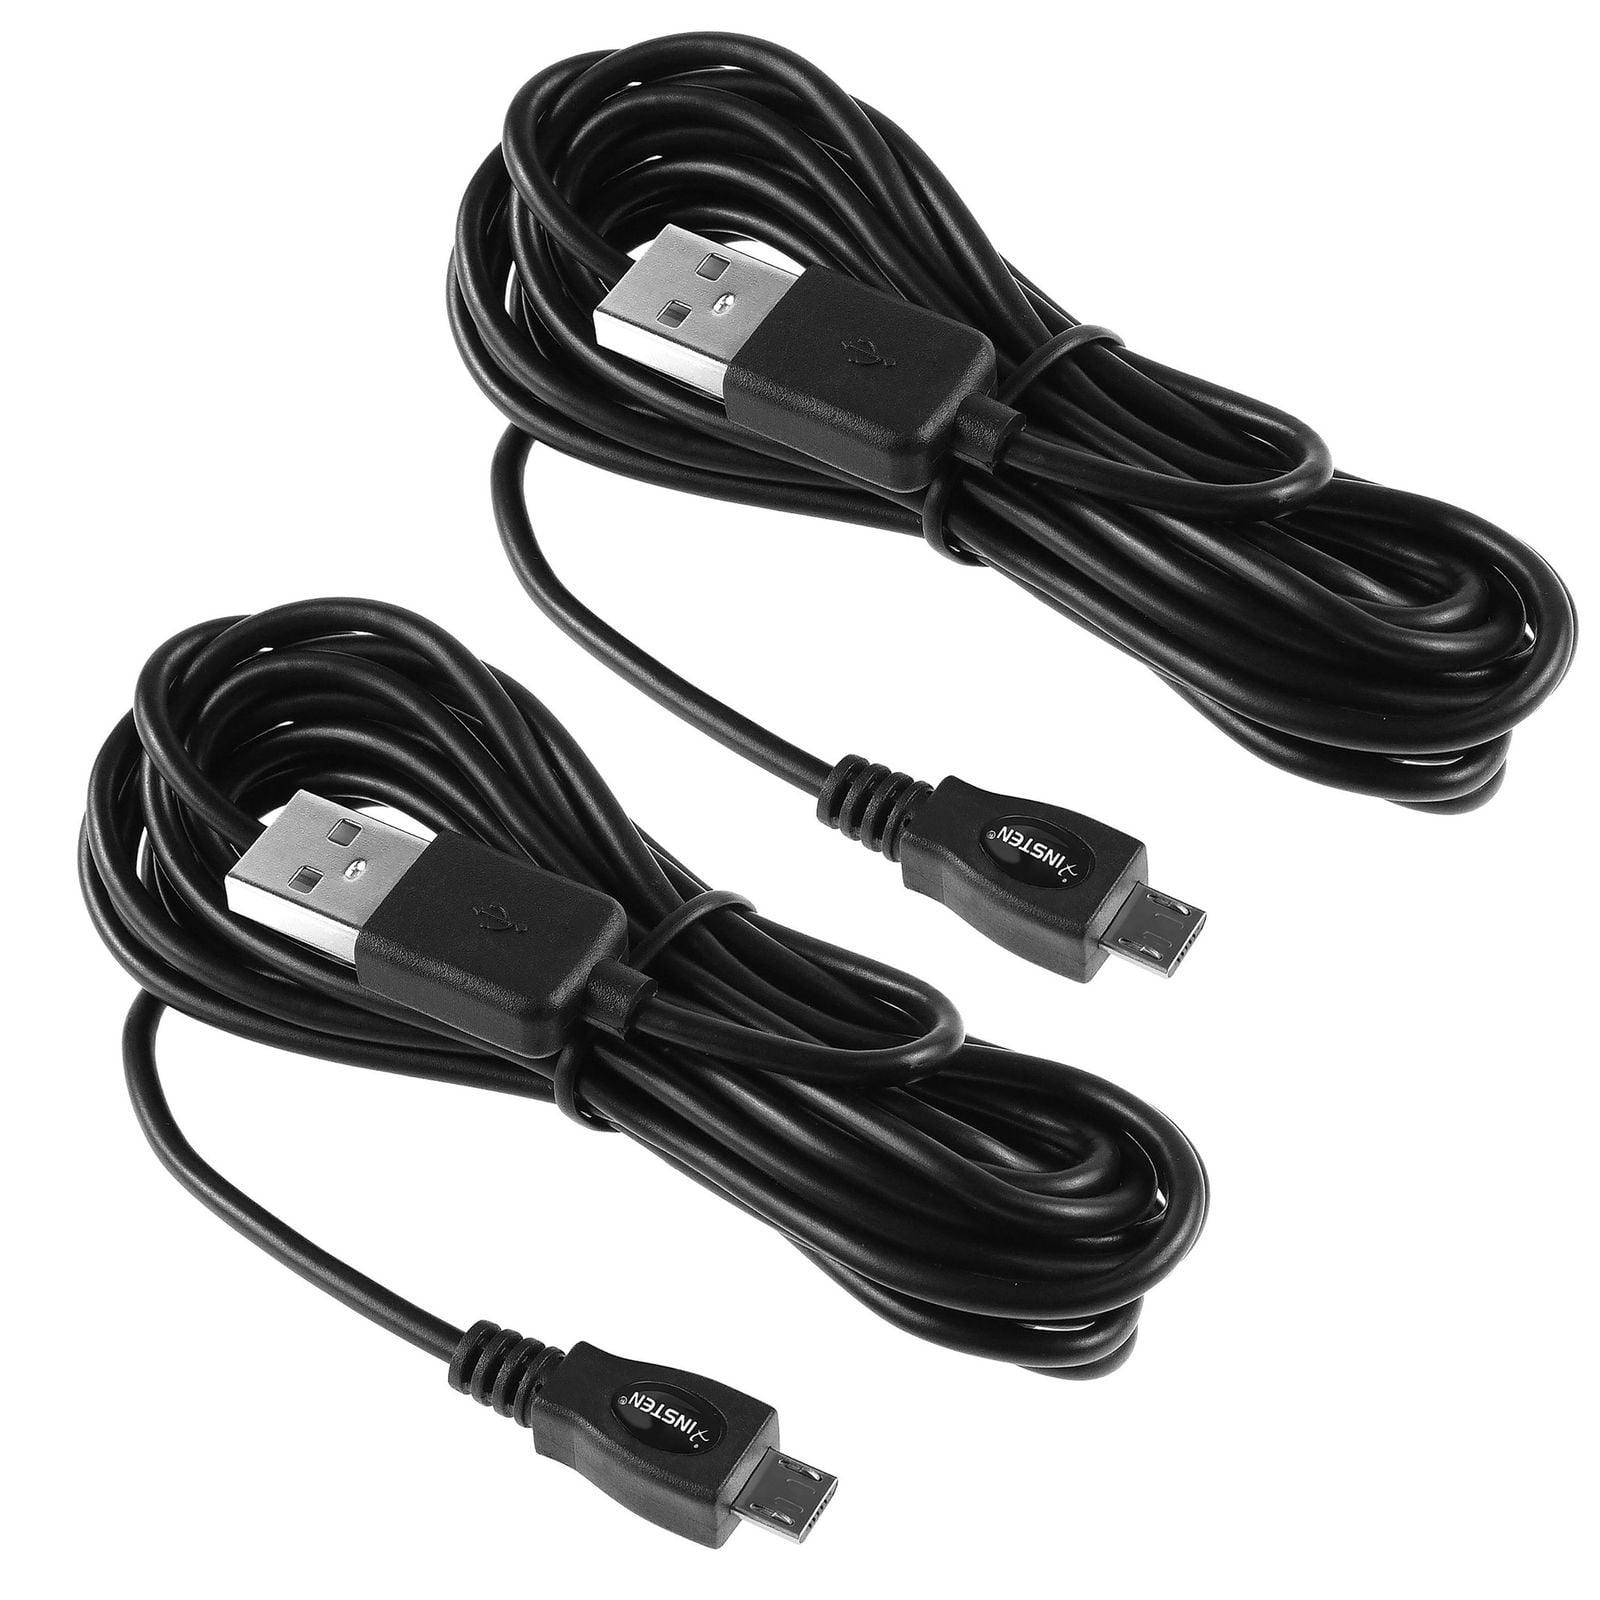 2 Pack Micro USB Charging Cable, 10ft Long USB 2.0 Charger Cord for Samsung  Android, PS4 Playstation 4, Xbox One Controller, Cell Phone Data Transfer